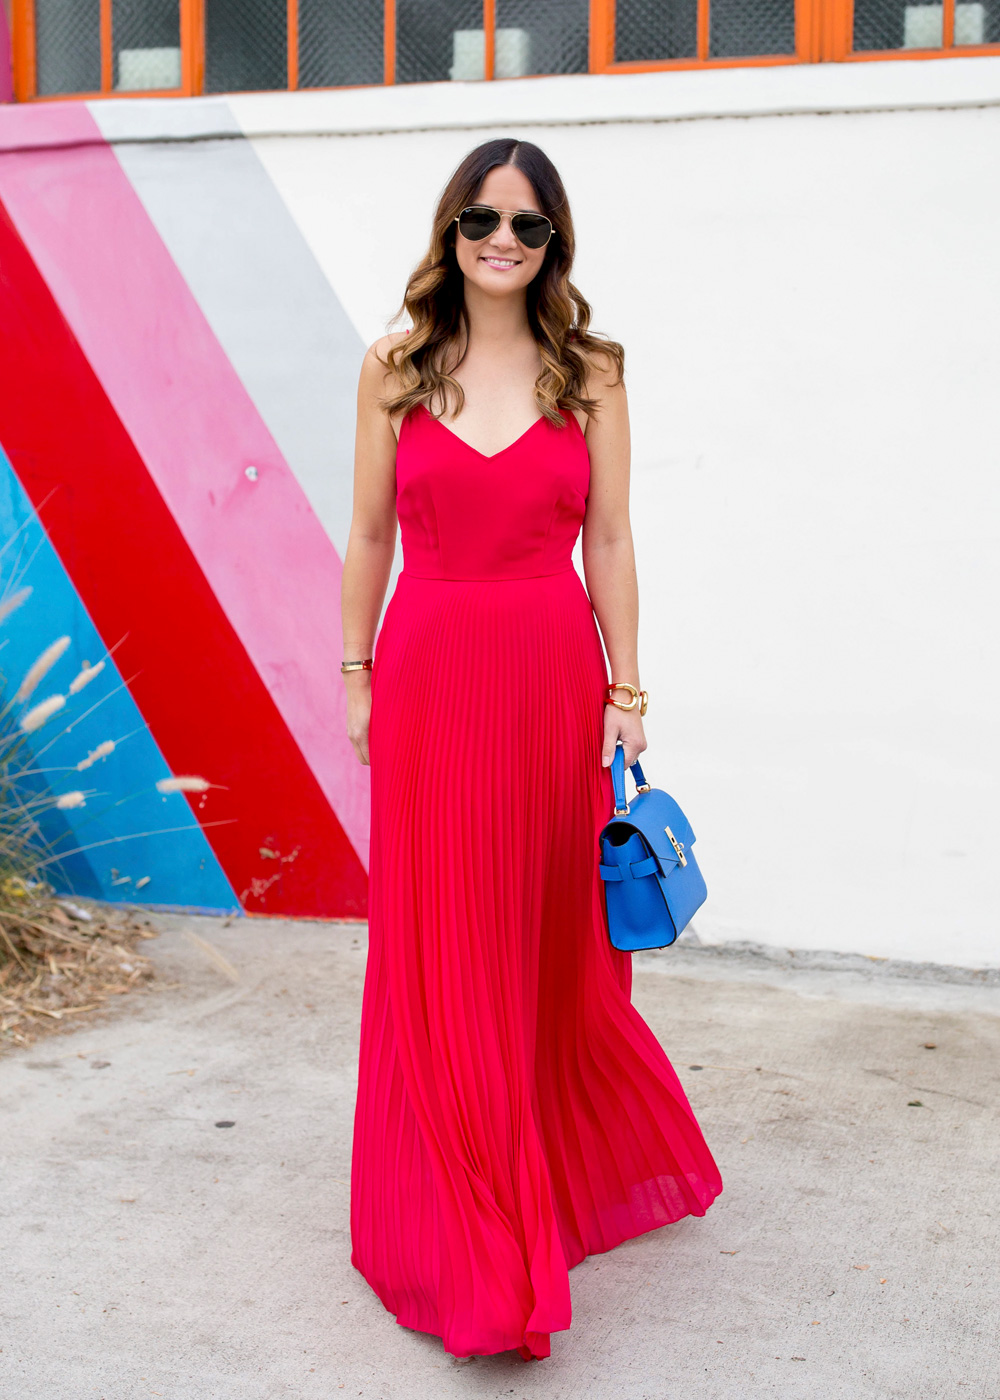 Jennifer Lake Style Charade walking in an ASOS pink pleated maxi dress, blue Henri Bendel Mini Uptown satchel, at a striped wall in Los Angeles